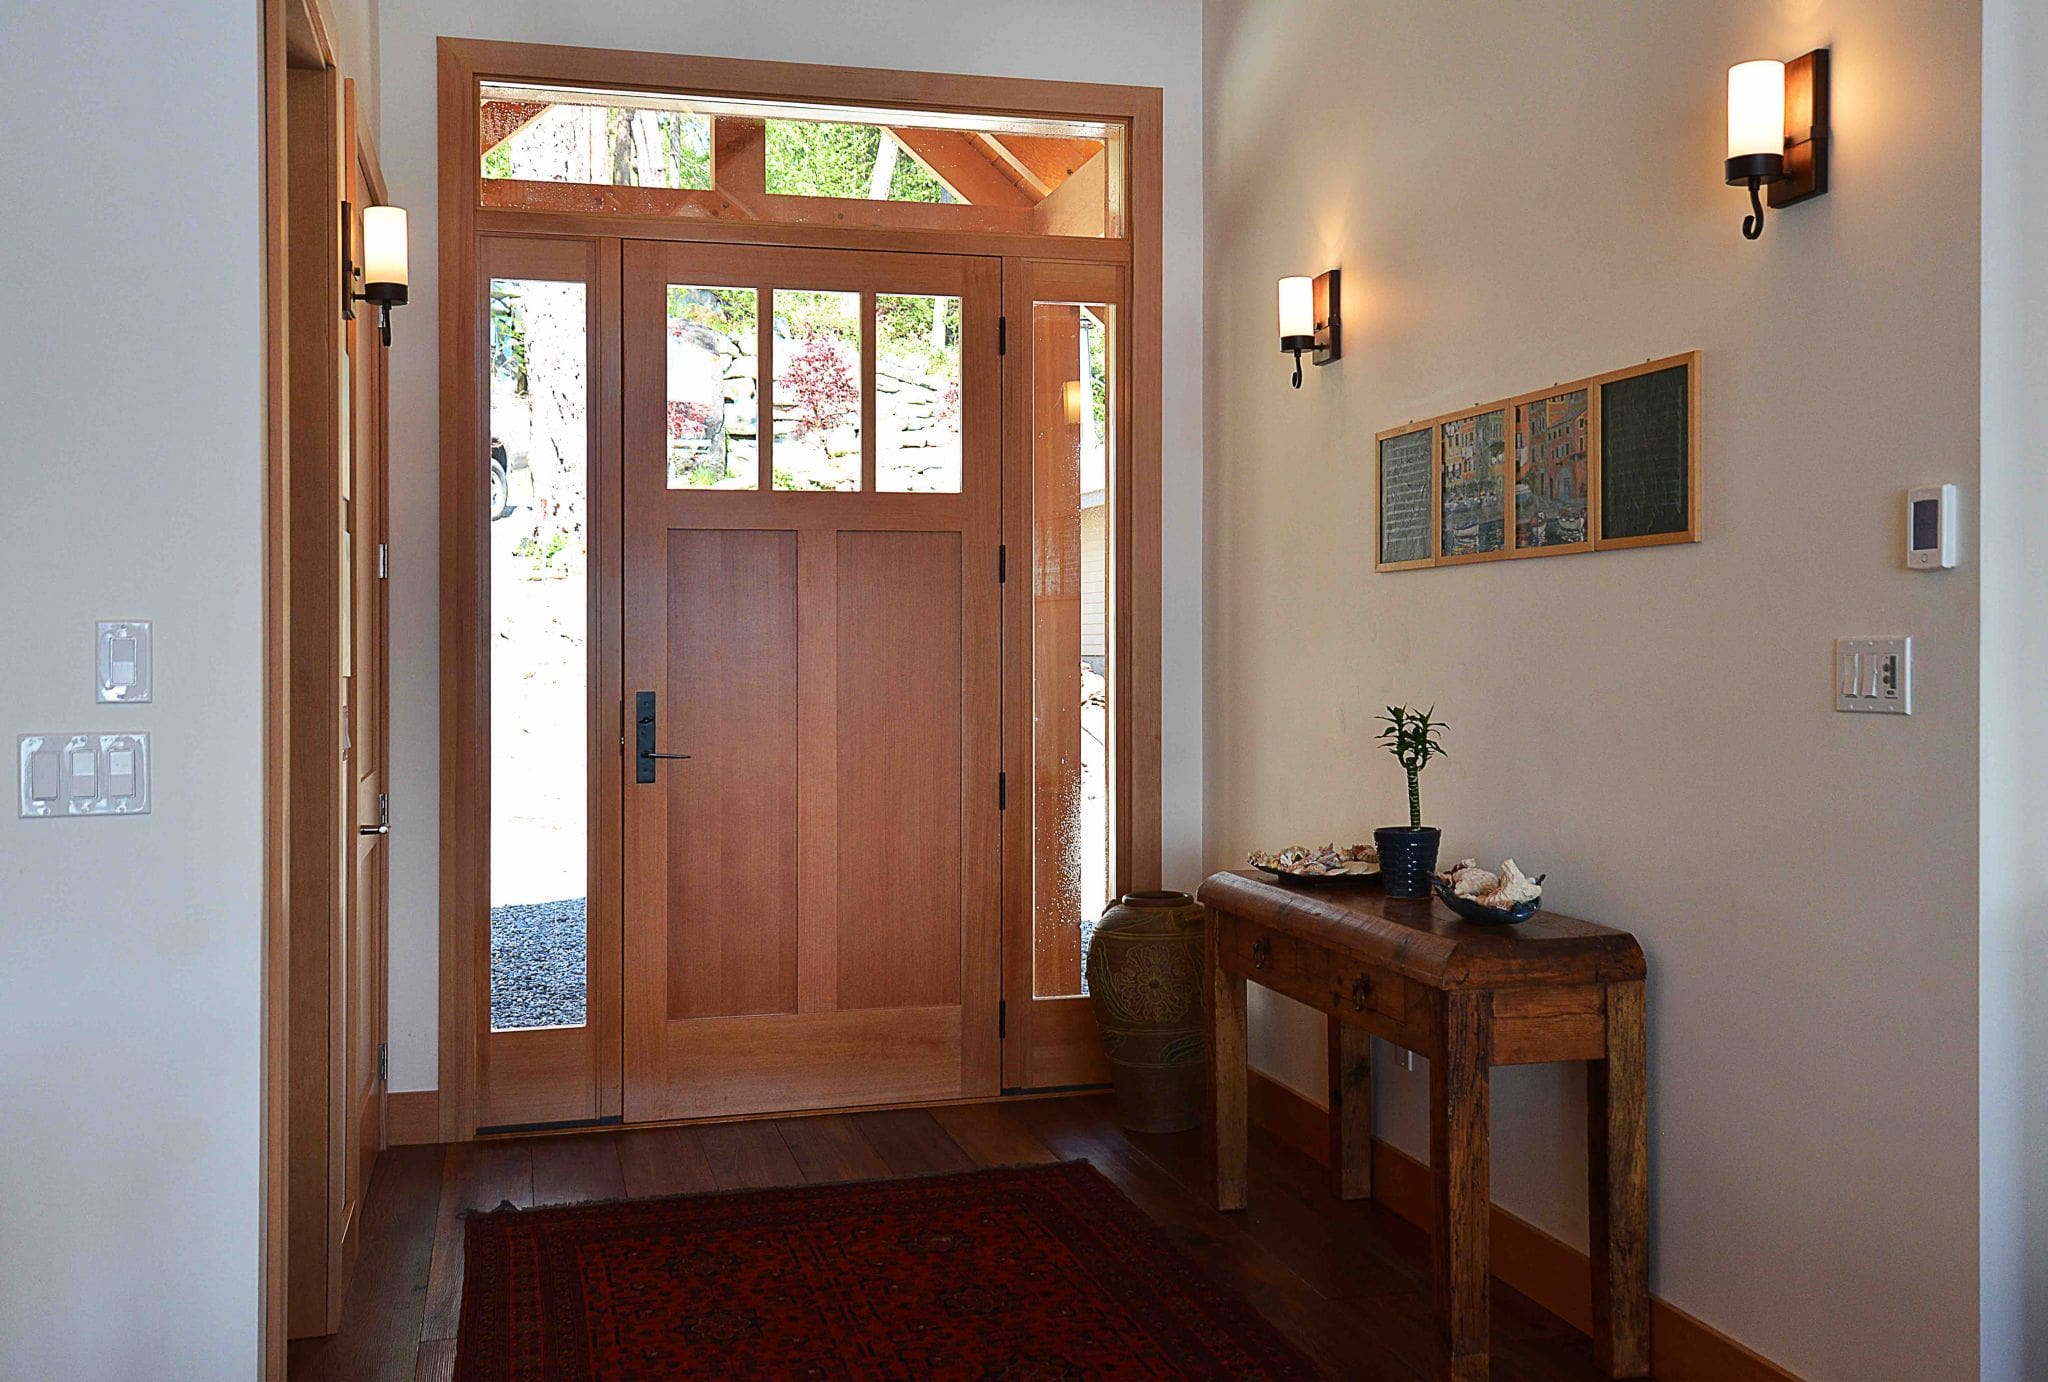 The inside of the front door in a new home